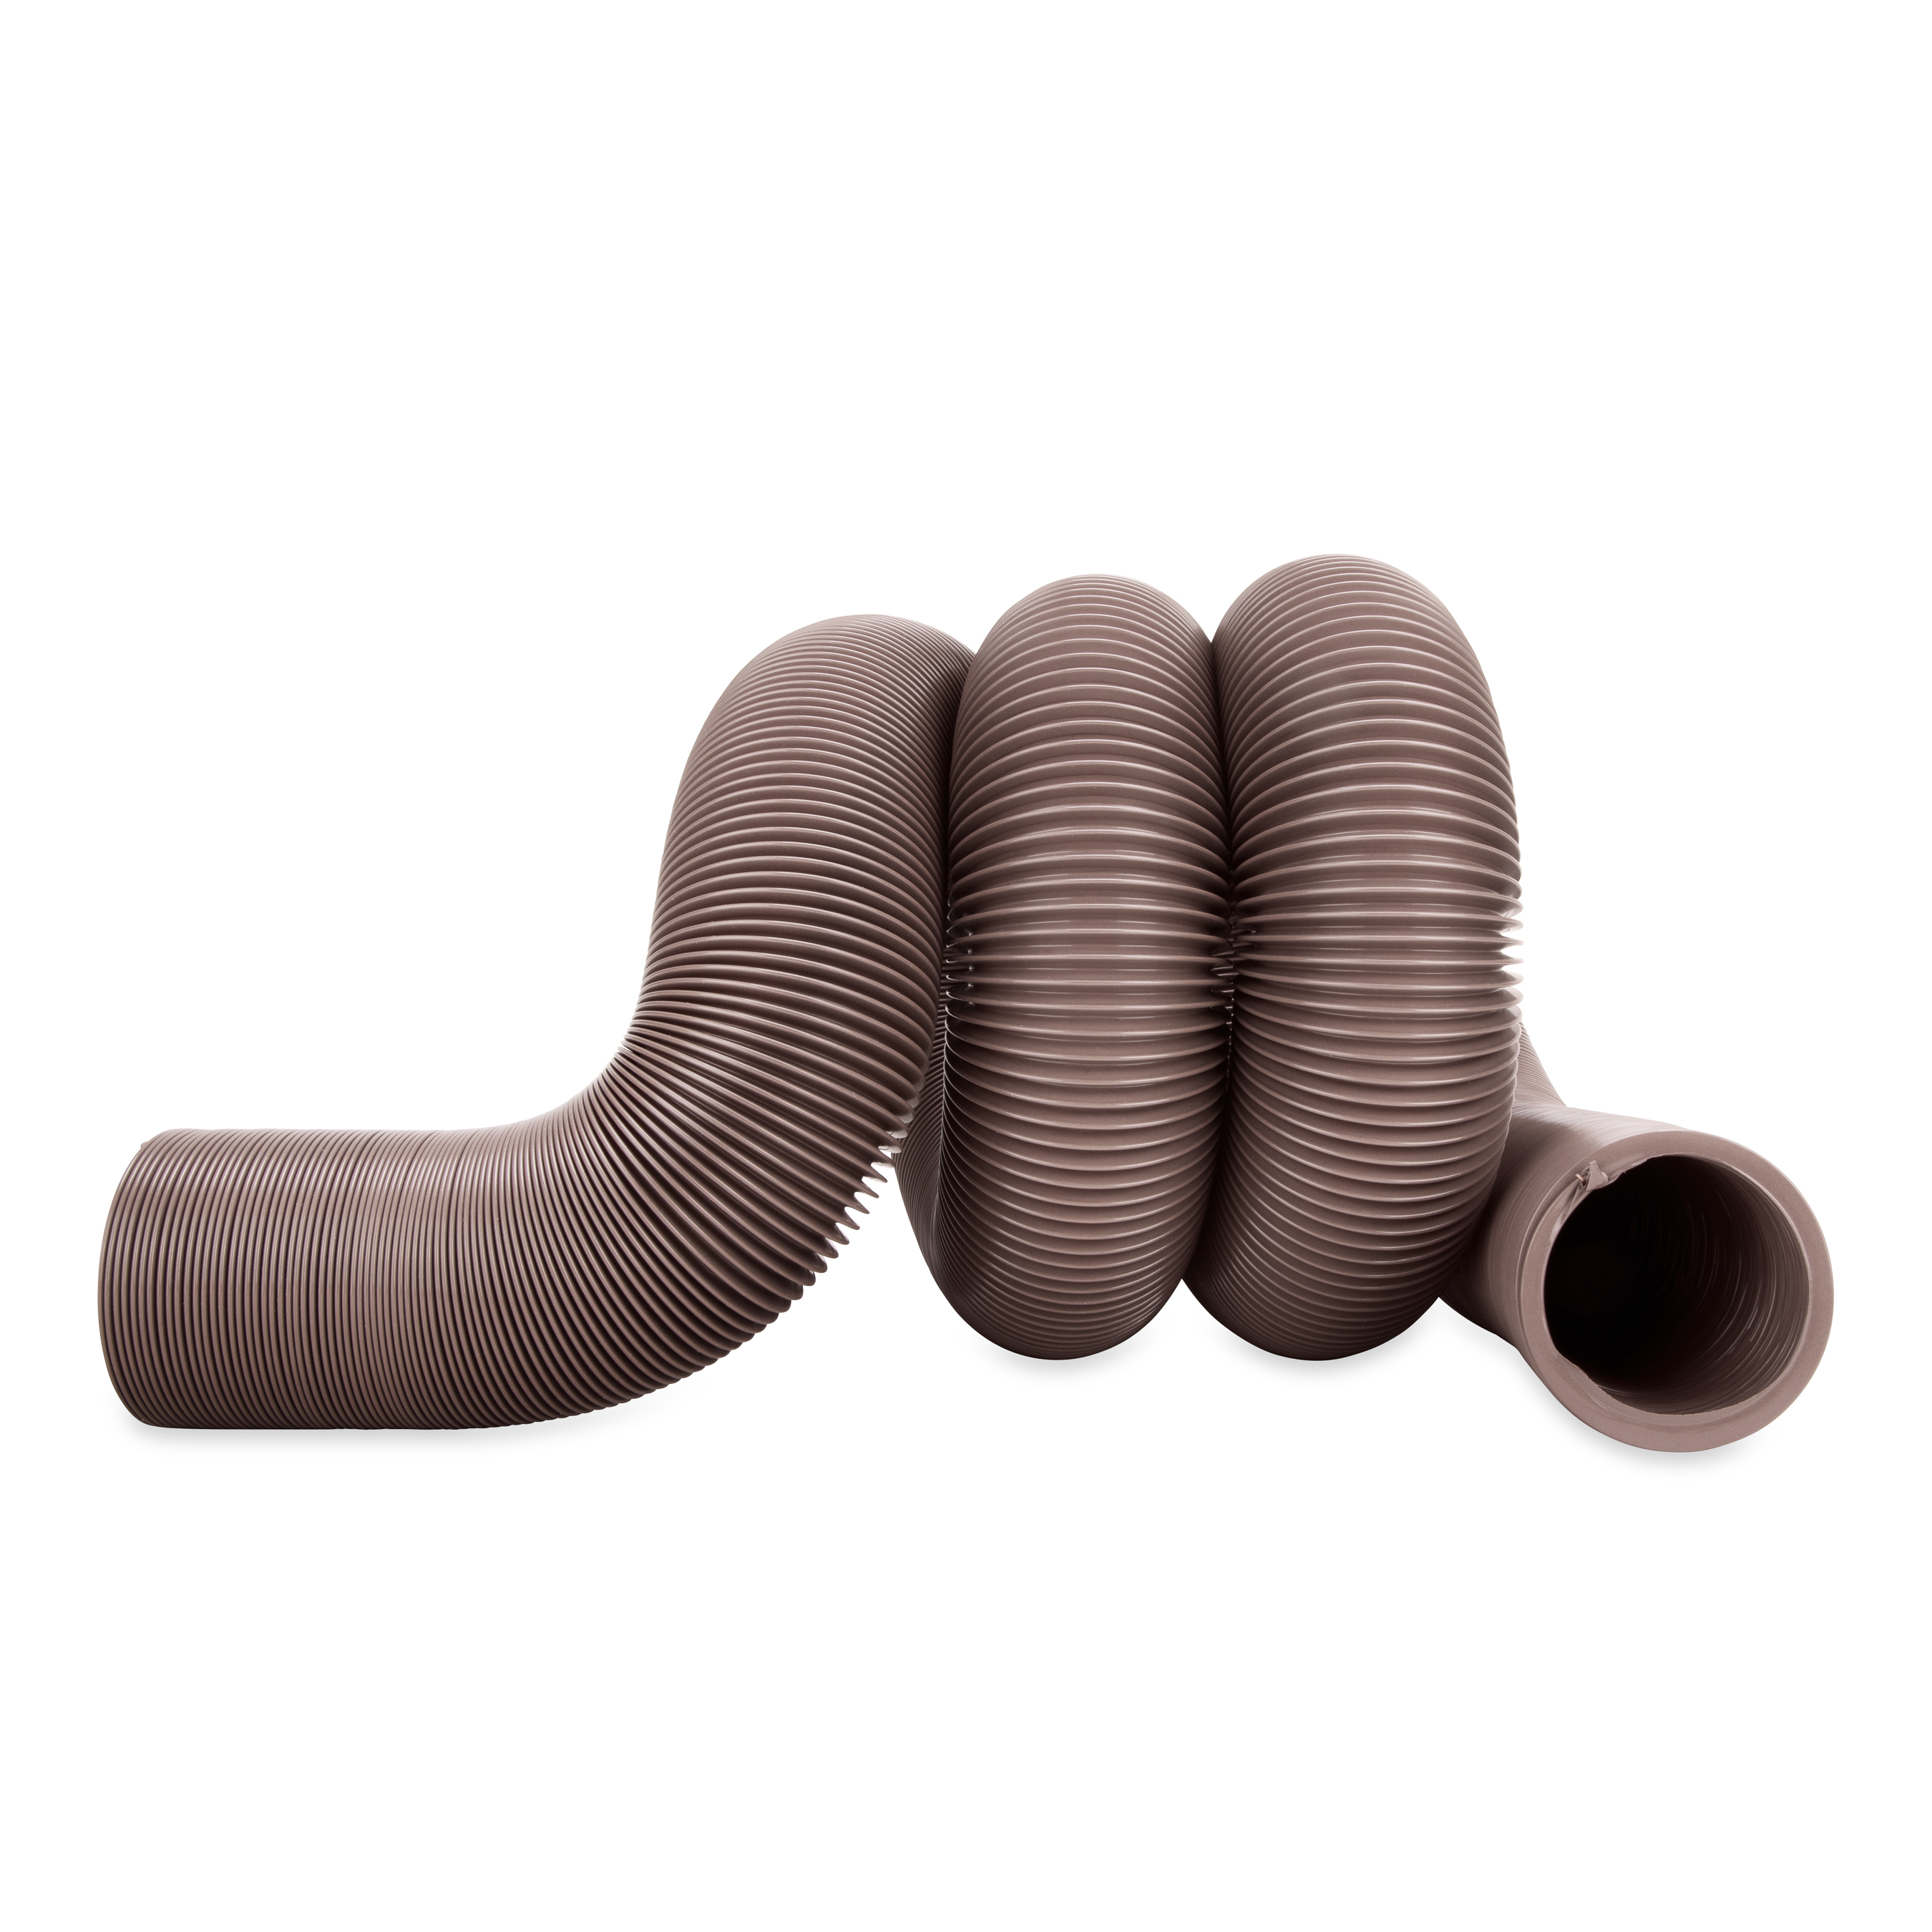 Camco 20-Foot RV Sewer Hose - Brown, 15 Mils of HTS Vinyl (39631) - image 1 of 5